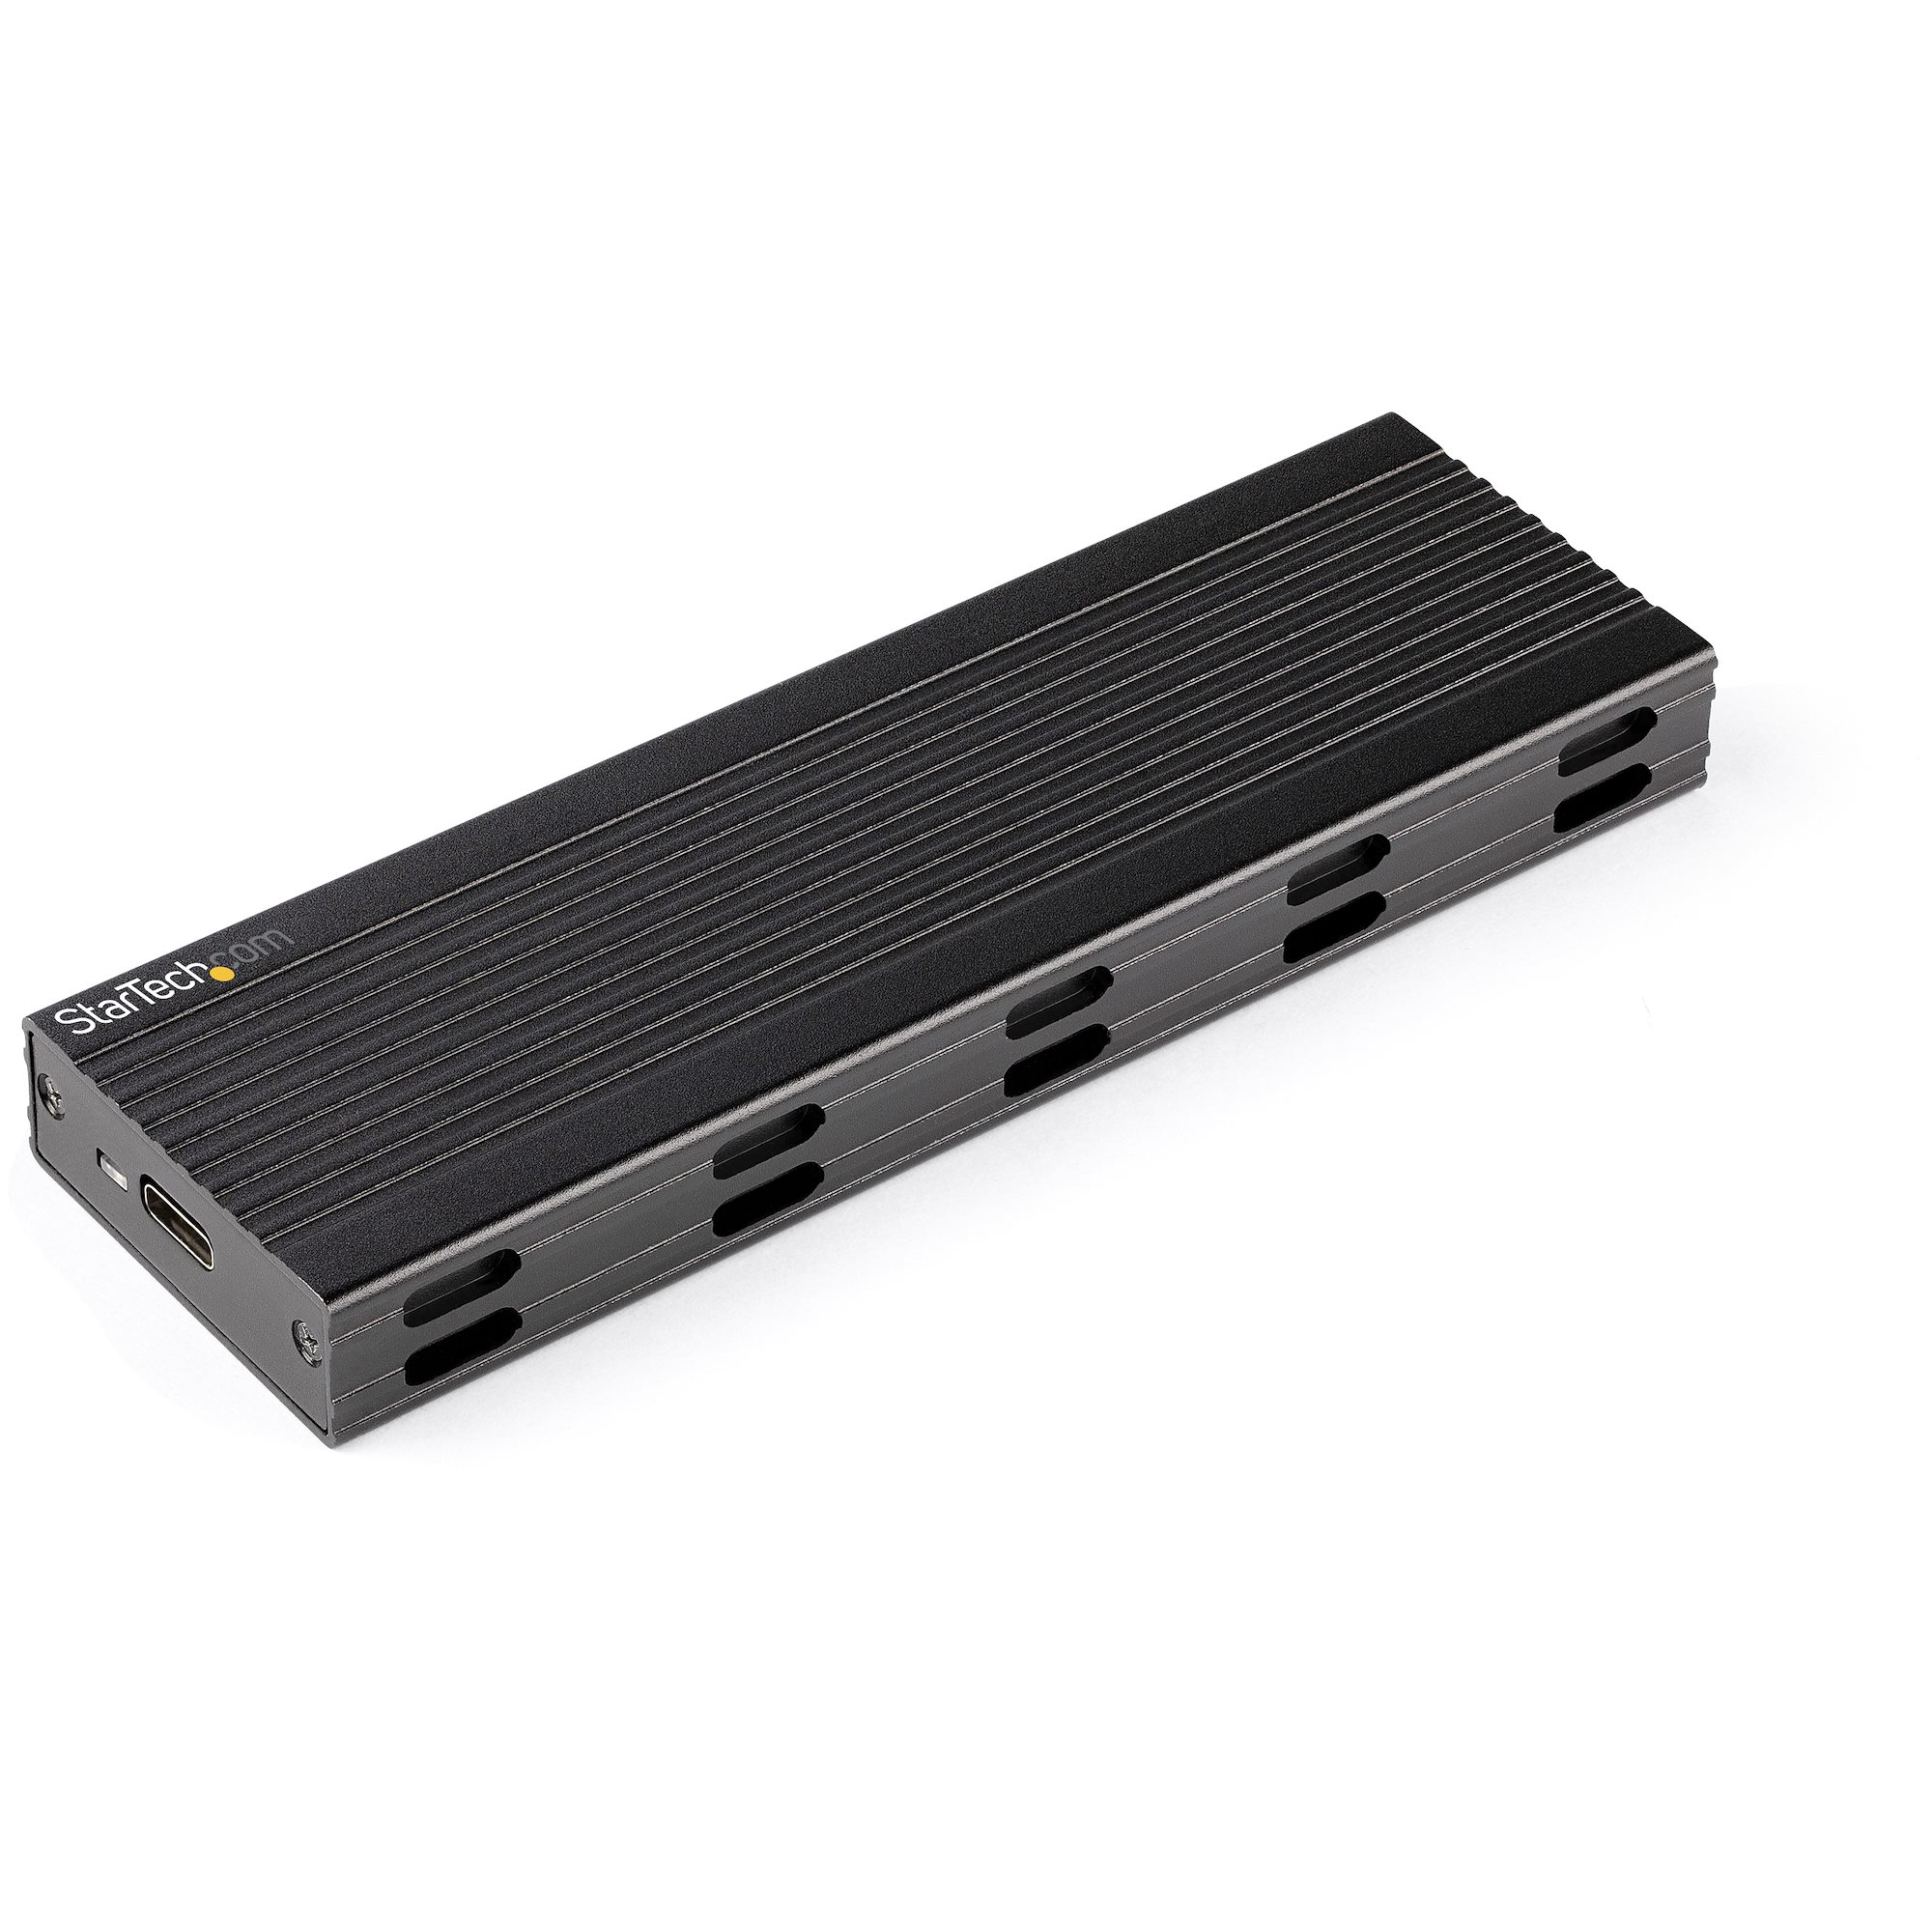 M.2 Nvme 2230 Ssd Enclosure Nvme To Usb Adapter 10gbps Usb 3.2